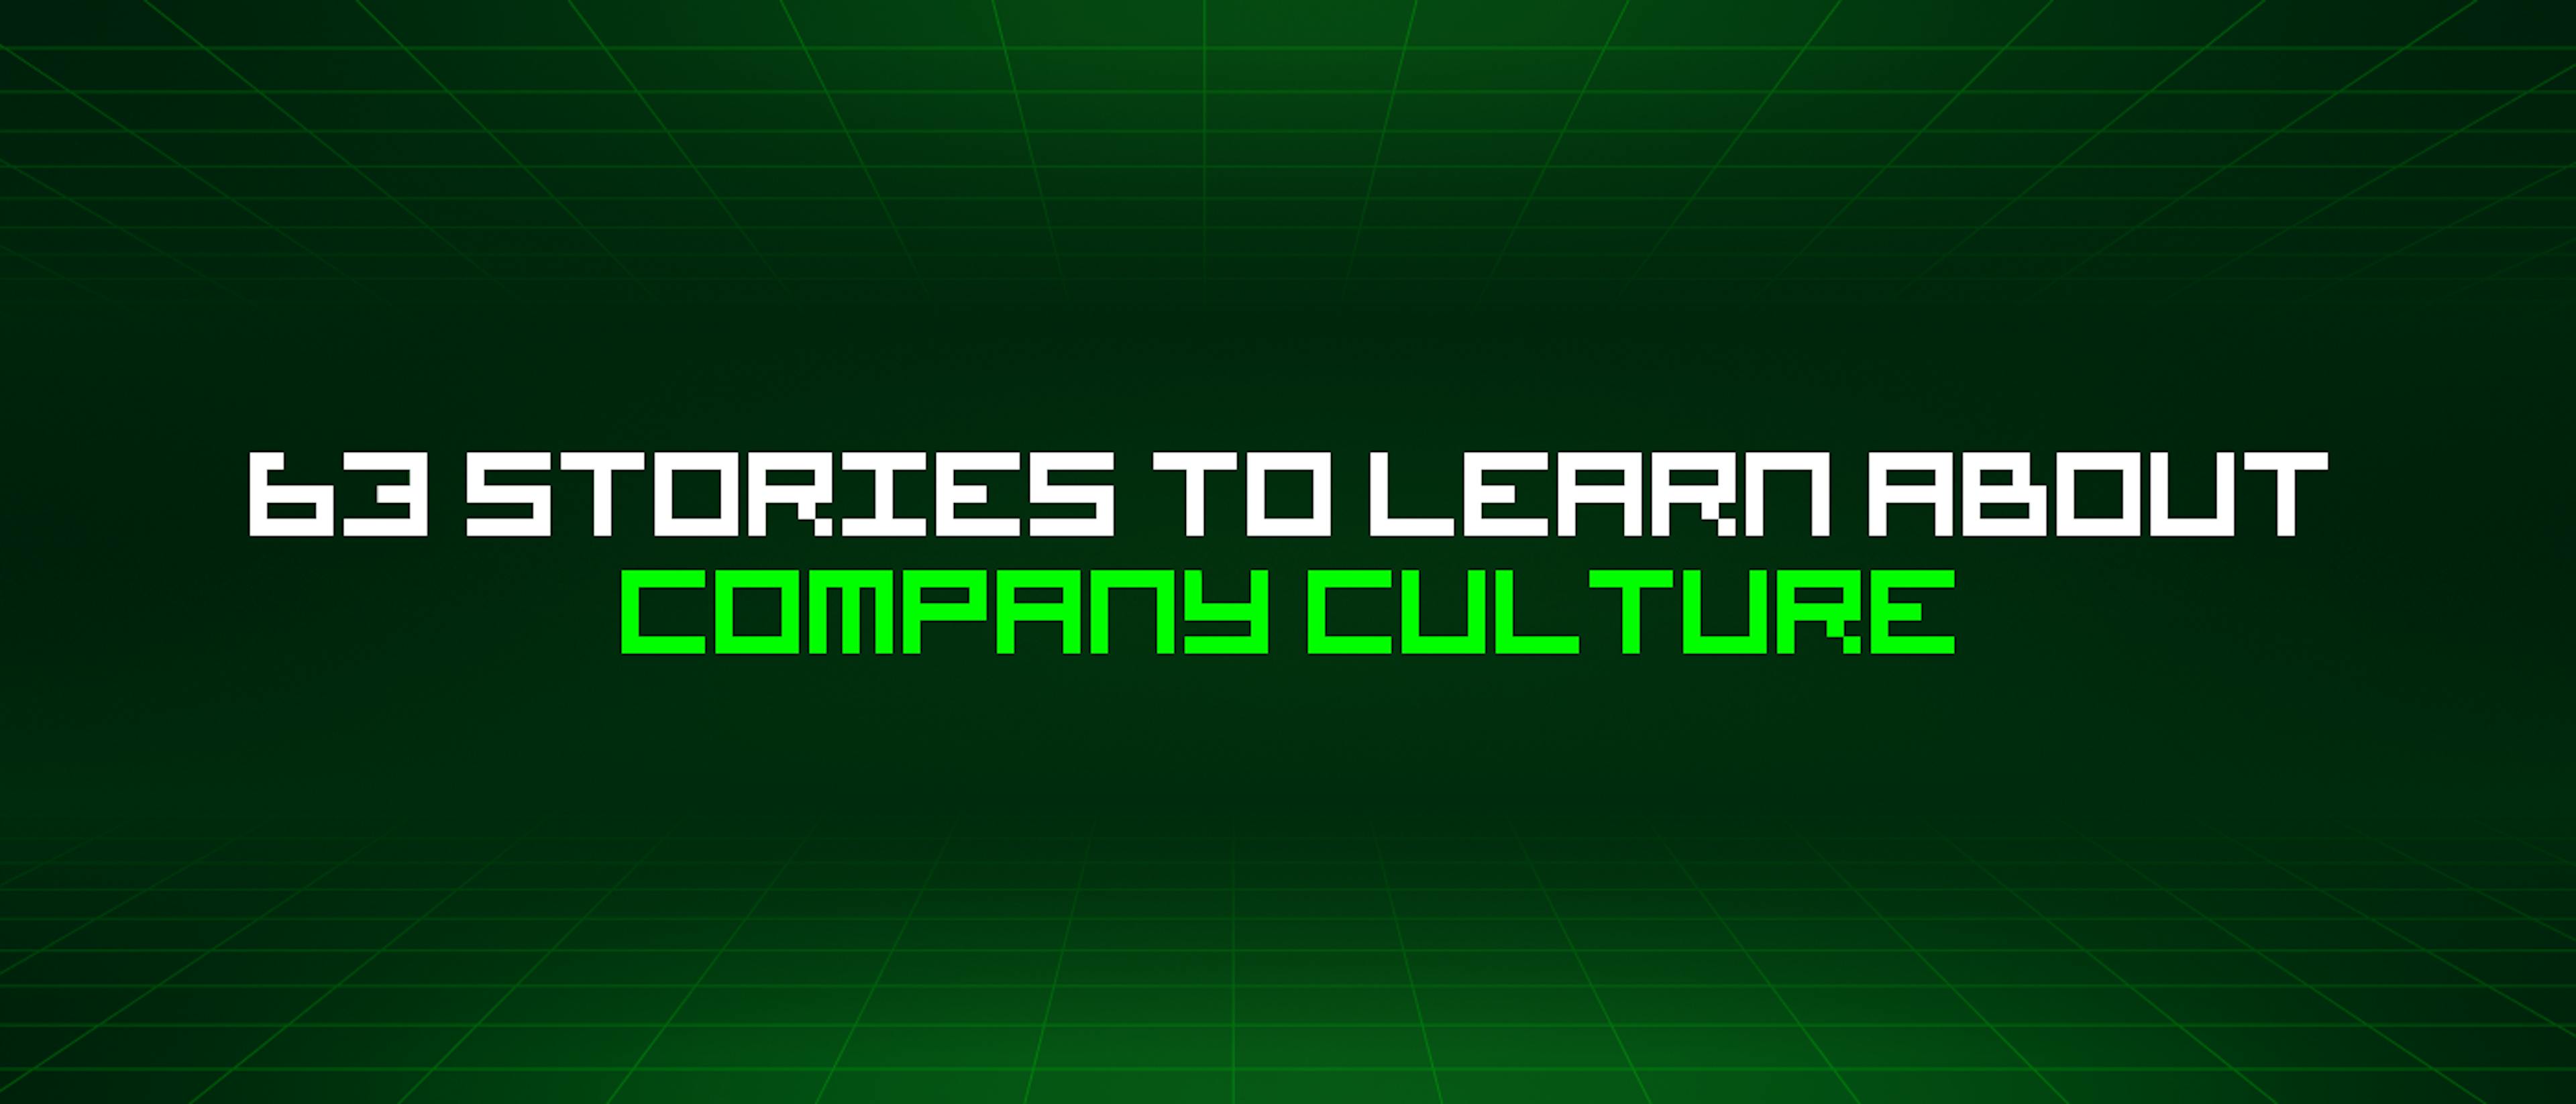 featured image - 63 Stories To Learn About Company Culture